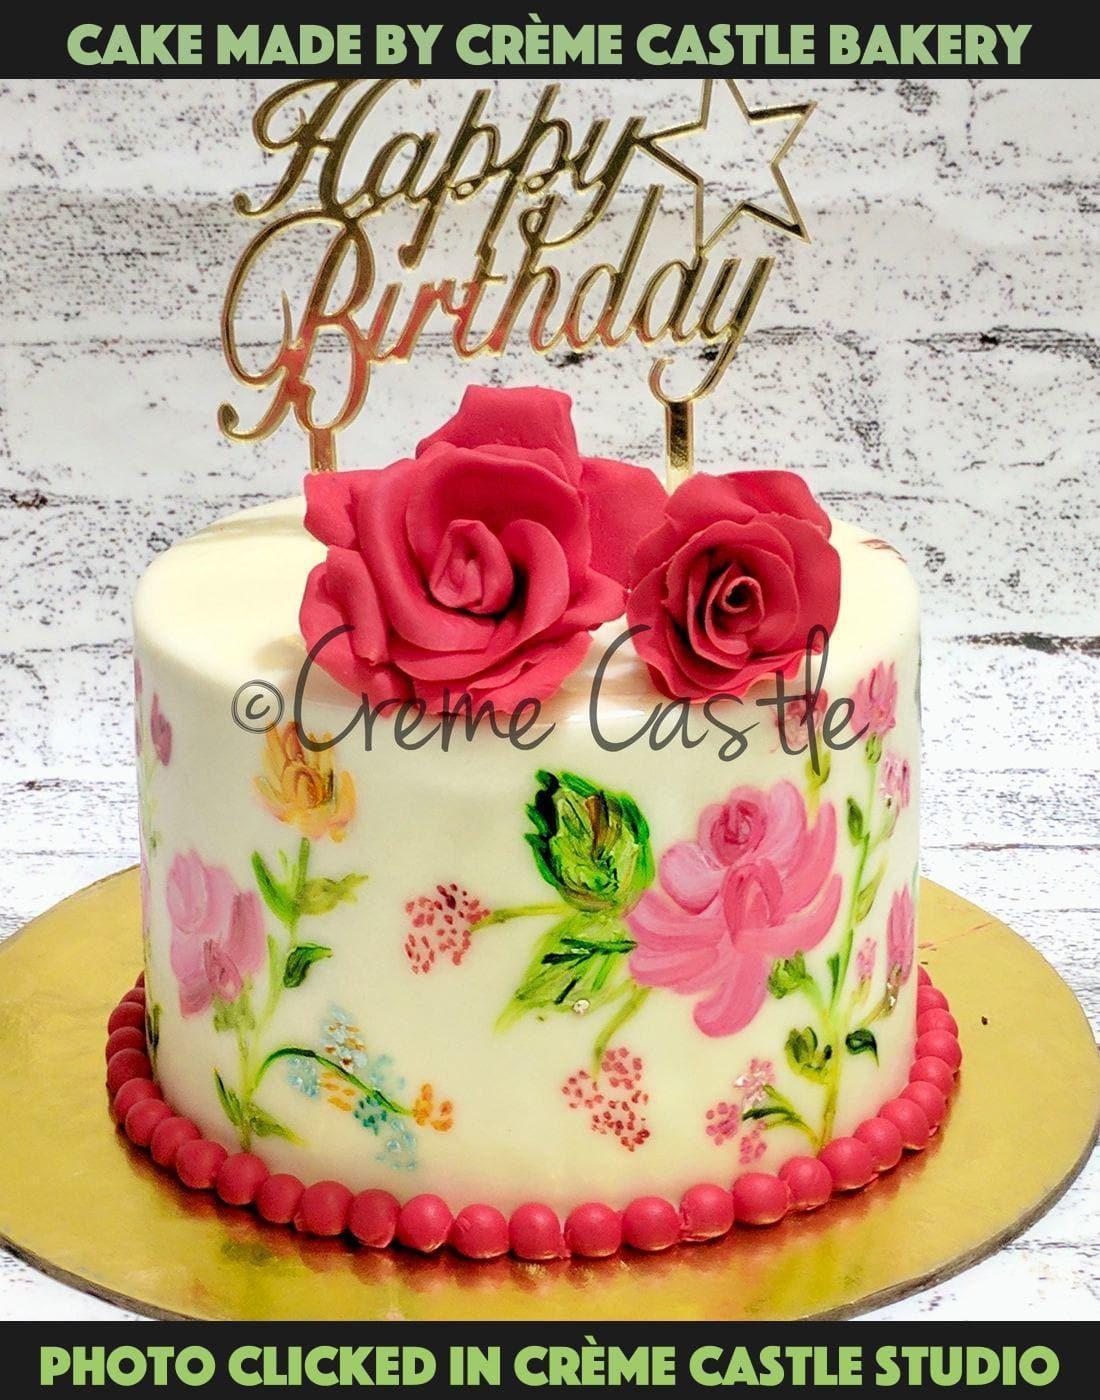 Hand painted floral cake 2 - Creme Castle